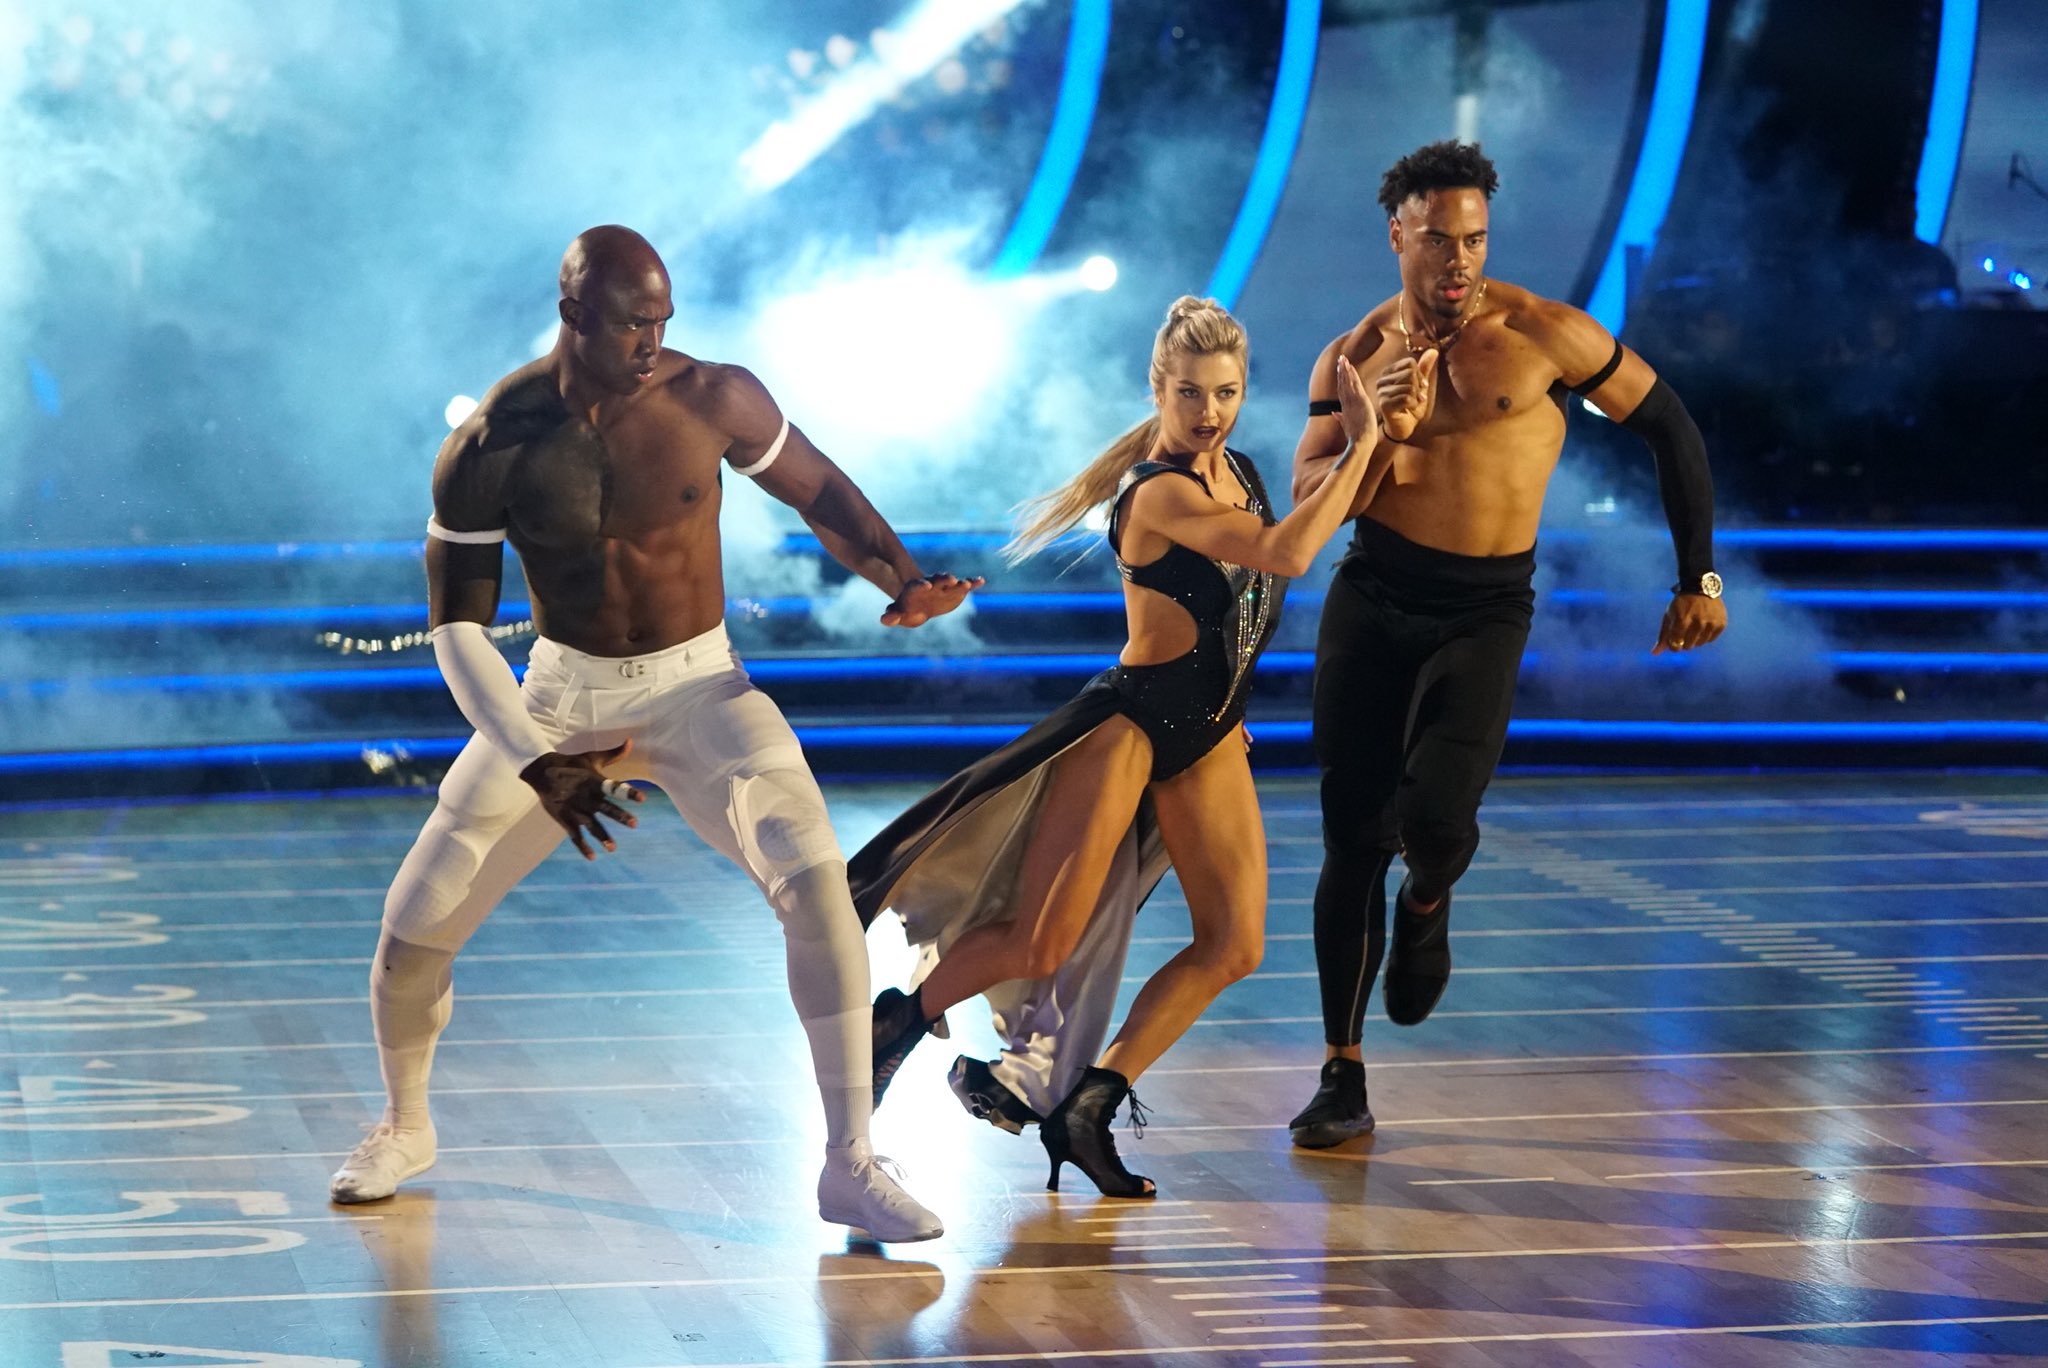 PHOTO: Former NFL star Demarcus Ware, left, suffered a dislocated finger but he, partner Lindsay Arnold and guest Rashad Jennings soldiered through on "Dancing with the Stars" on Monday, Oct. 15, 2018.